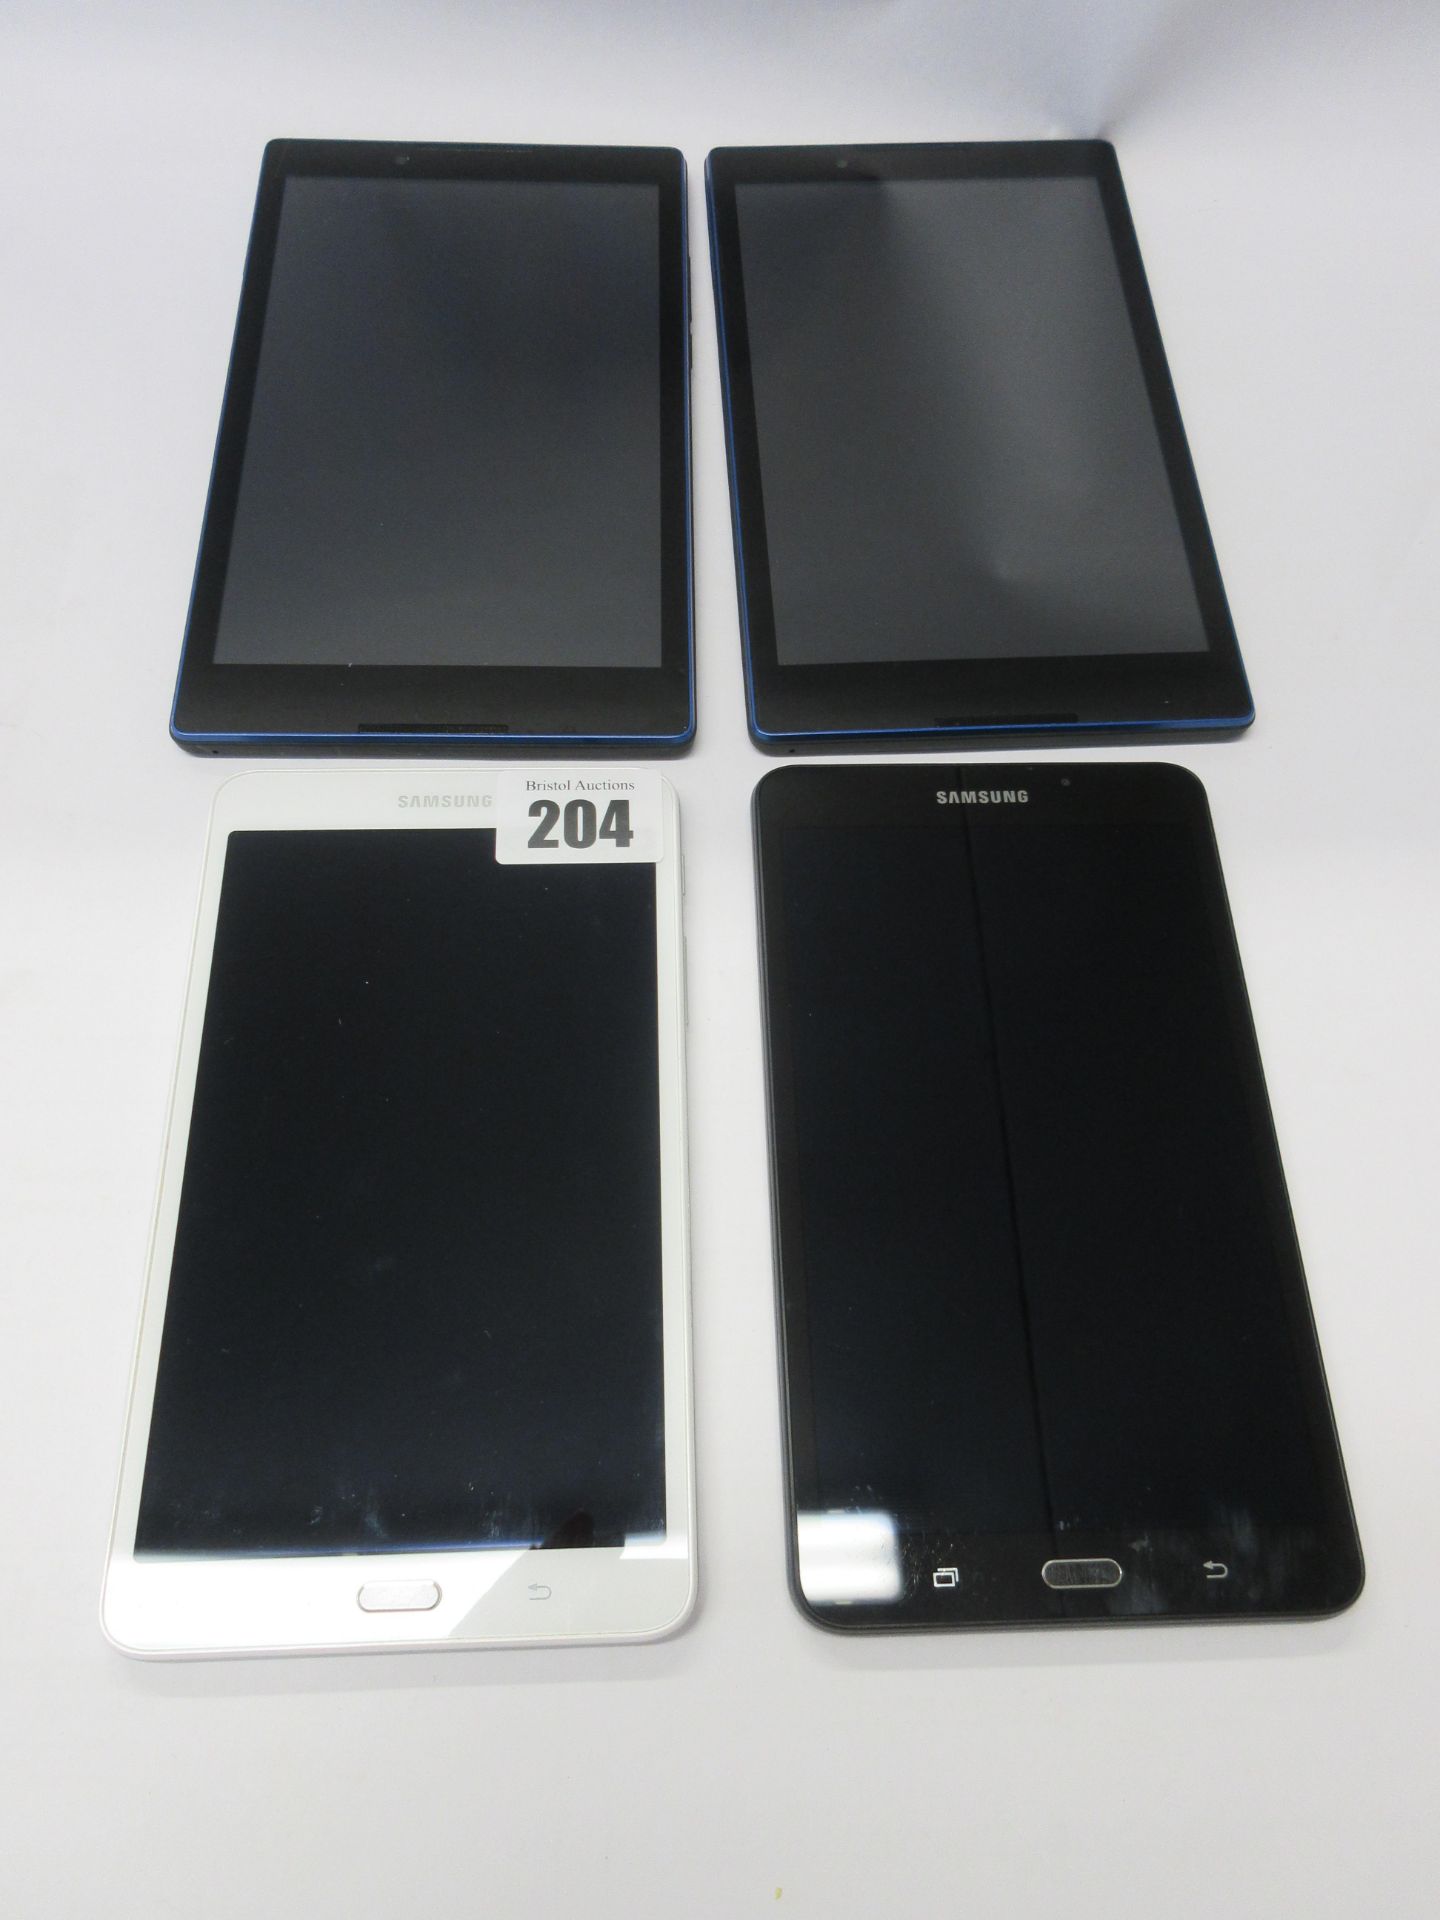 Four pre-owned Android tablets sold for parts; two Samsung Galaxy Tab A SM-T280 72 and two Lenovo